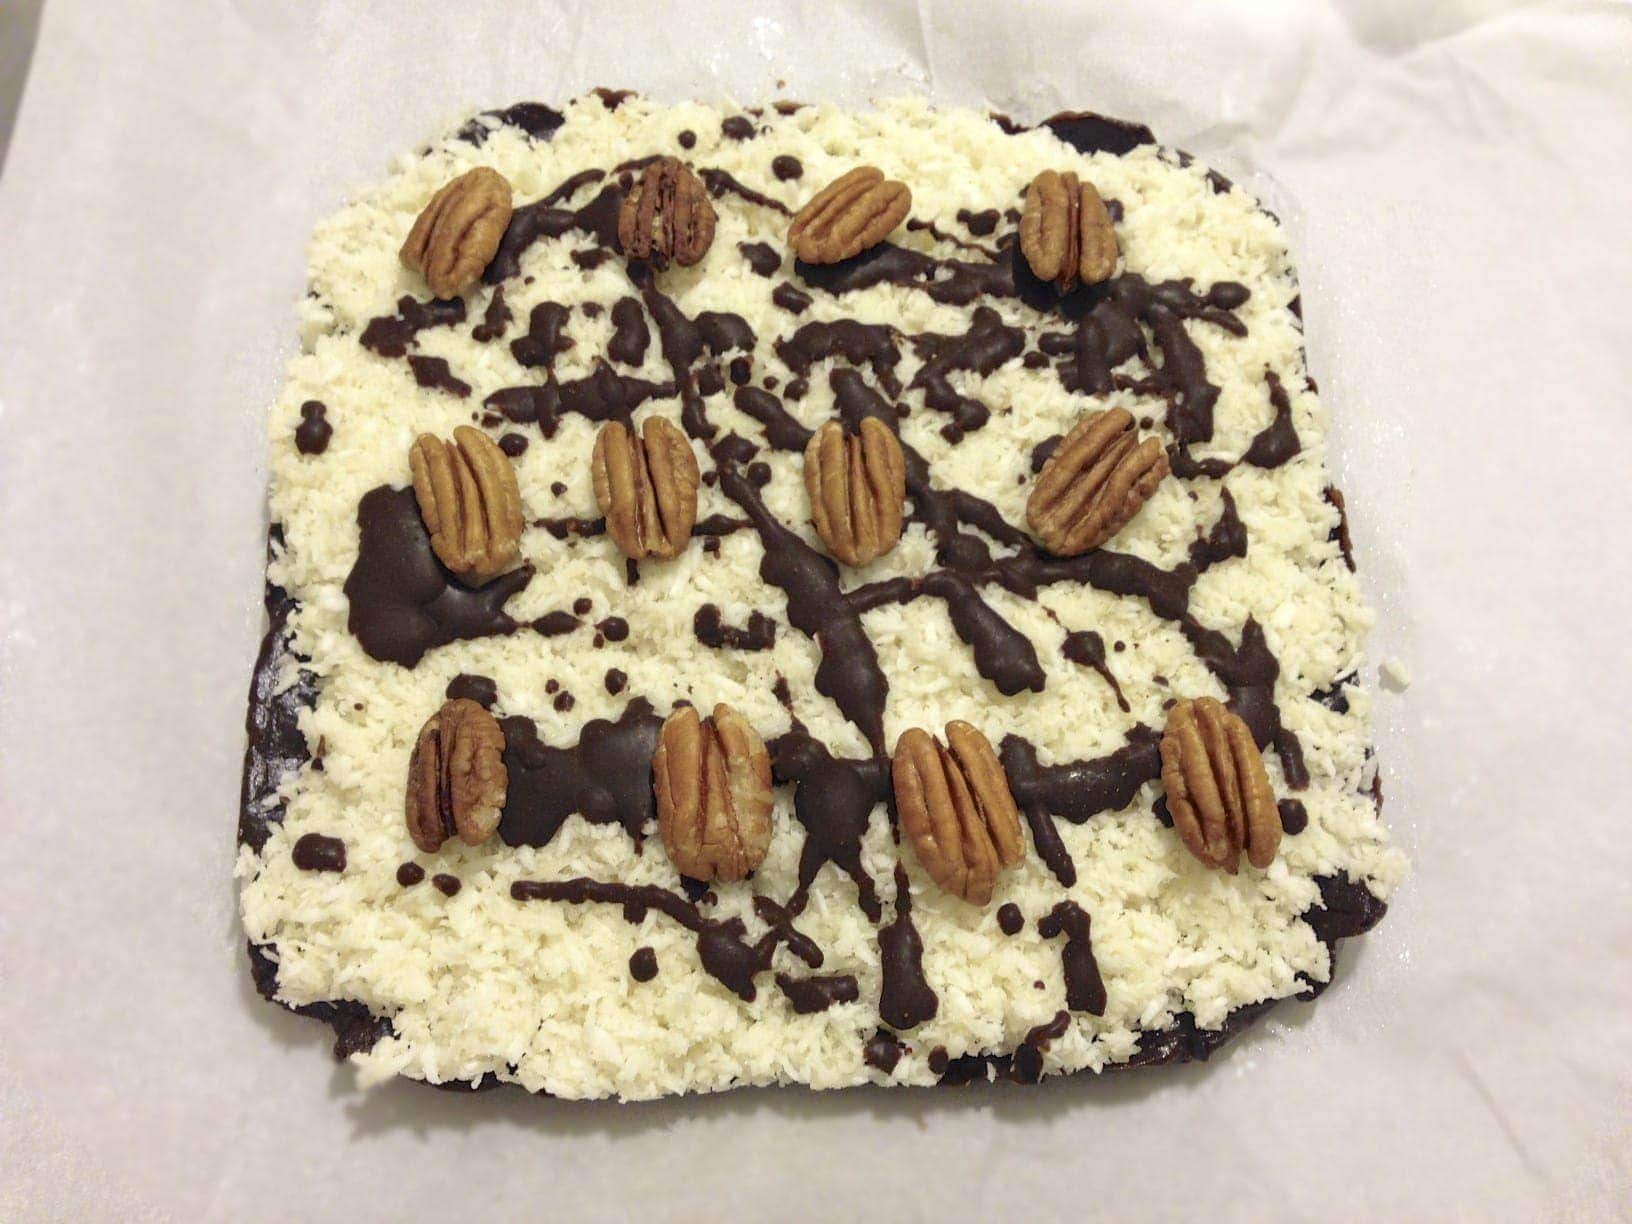 large square paleo chocolate coconut bar topped with pecans drizzled with chocolate